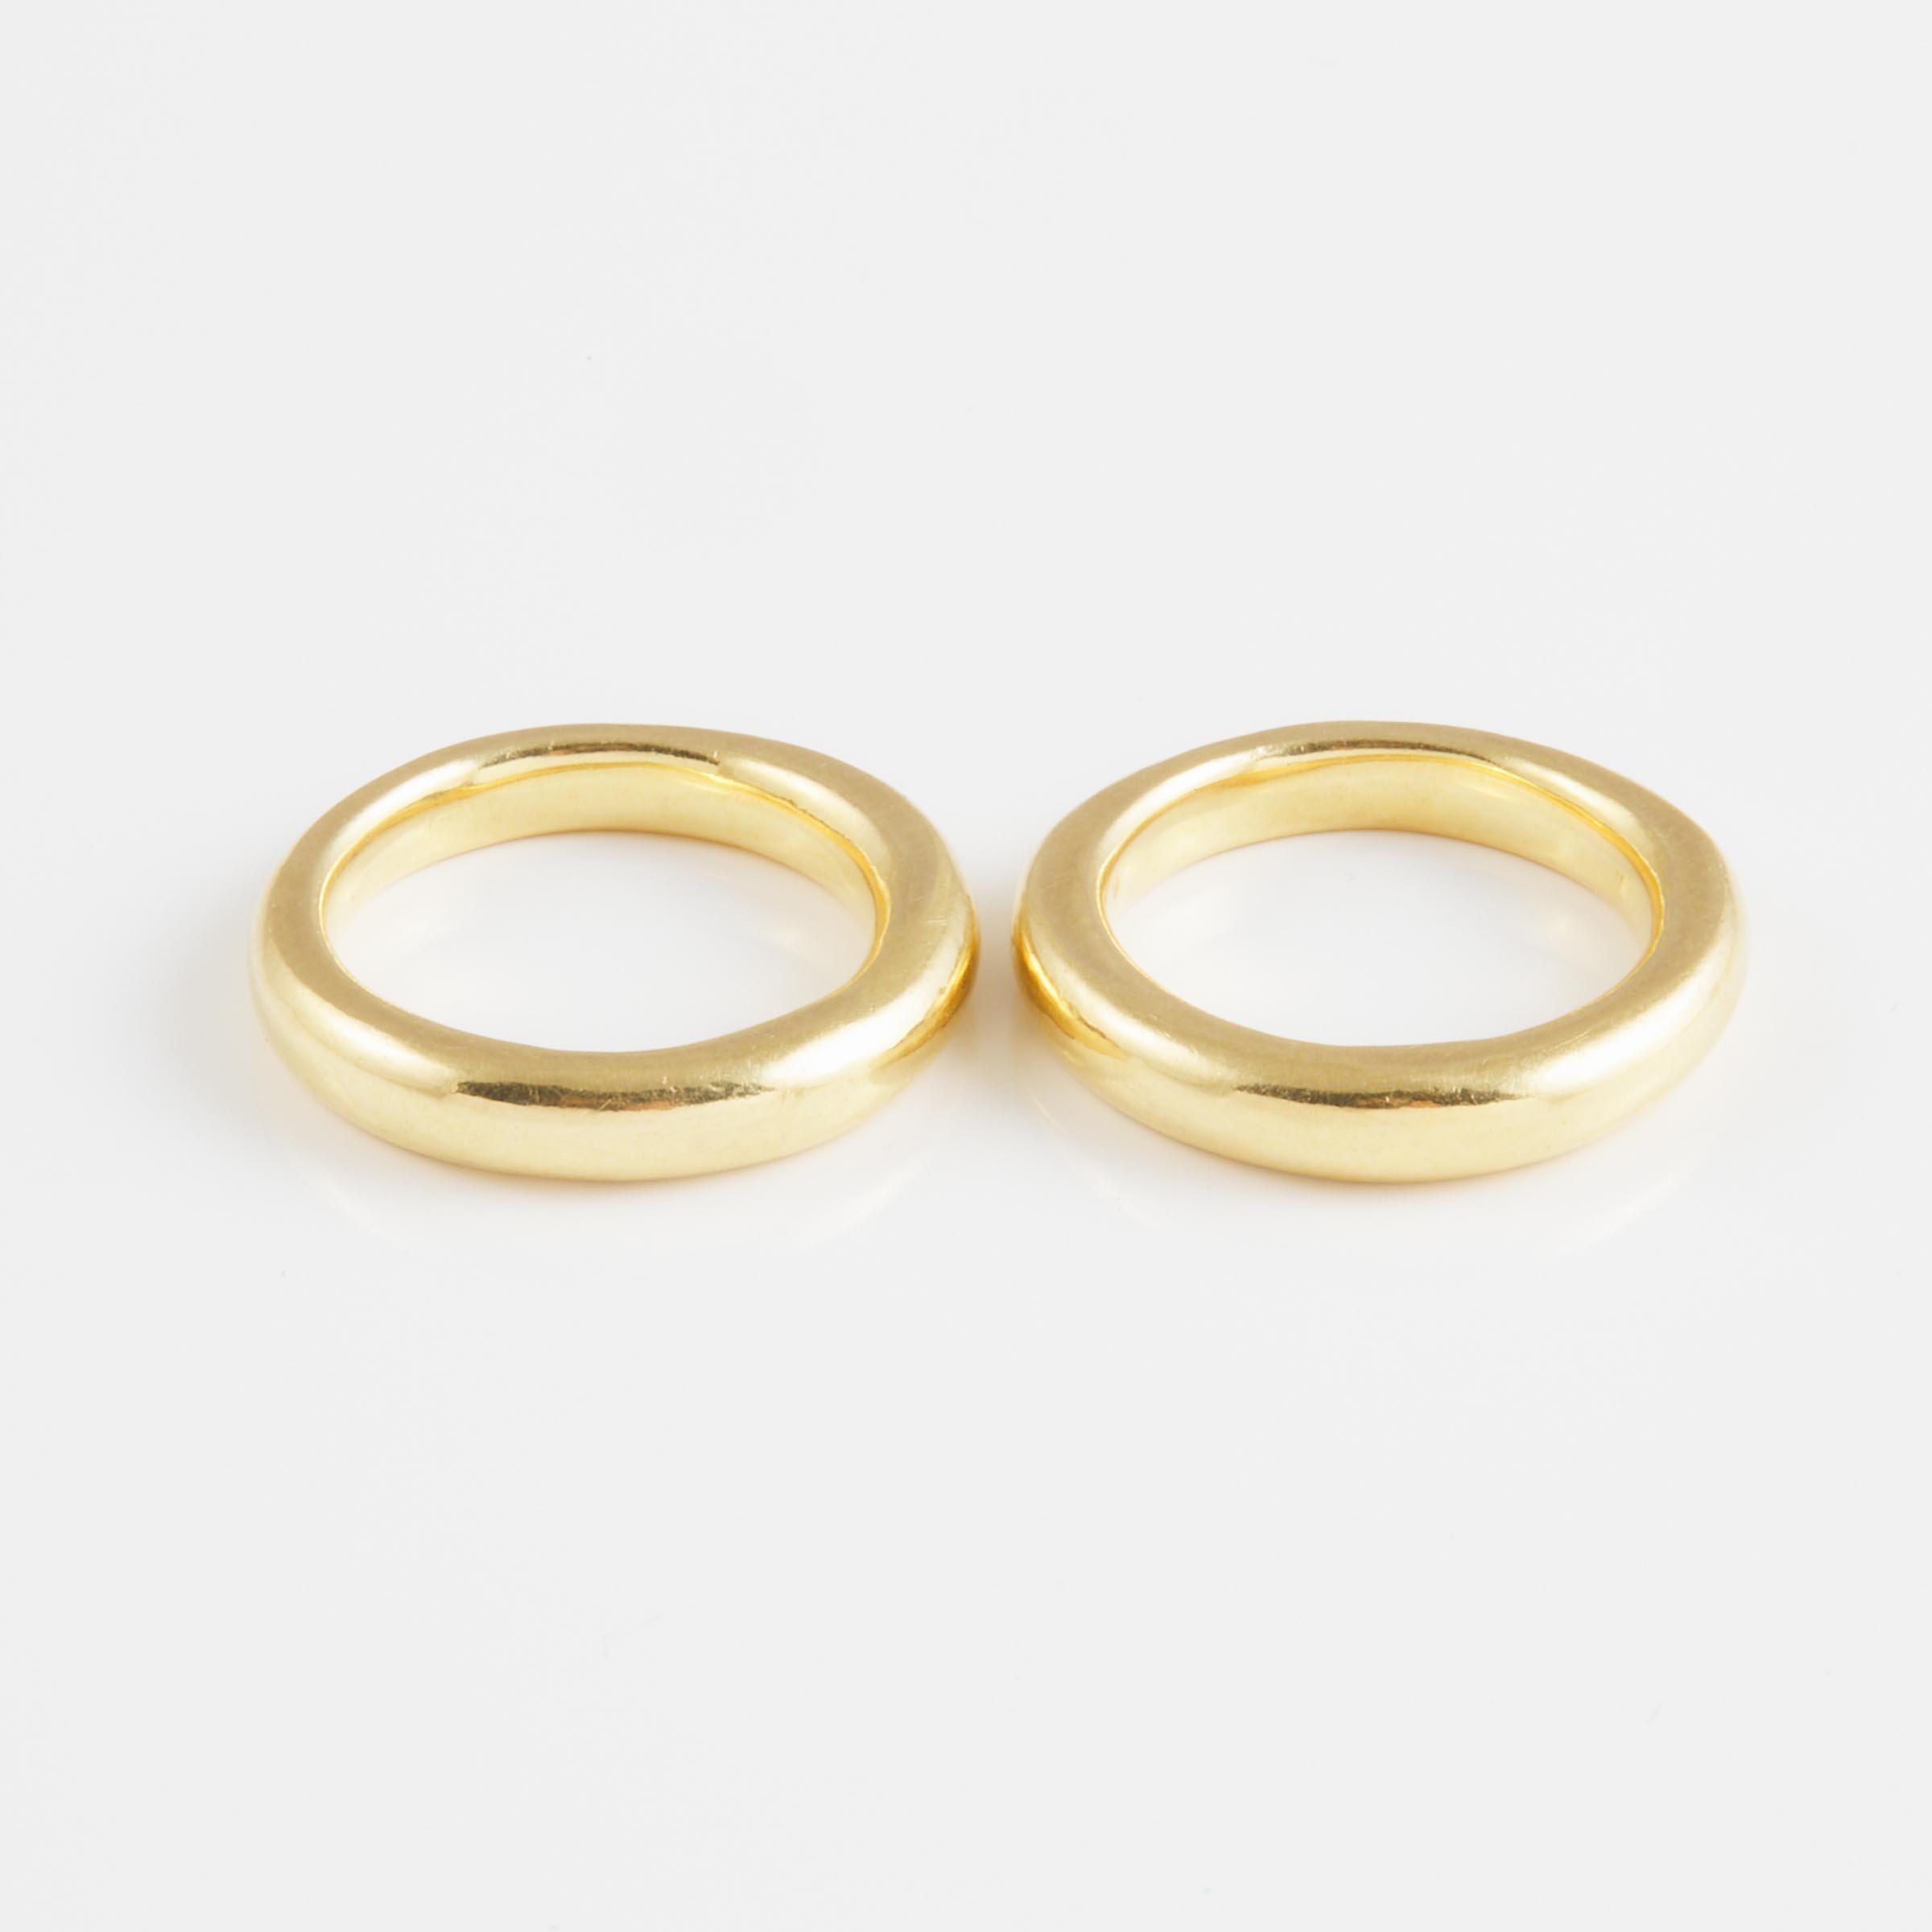 2 x 18k Yellow Gold Bands